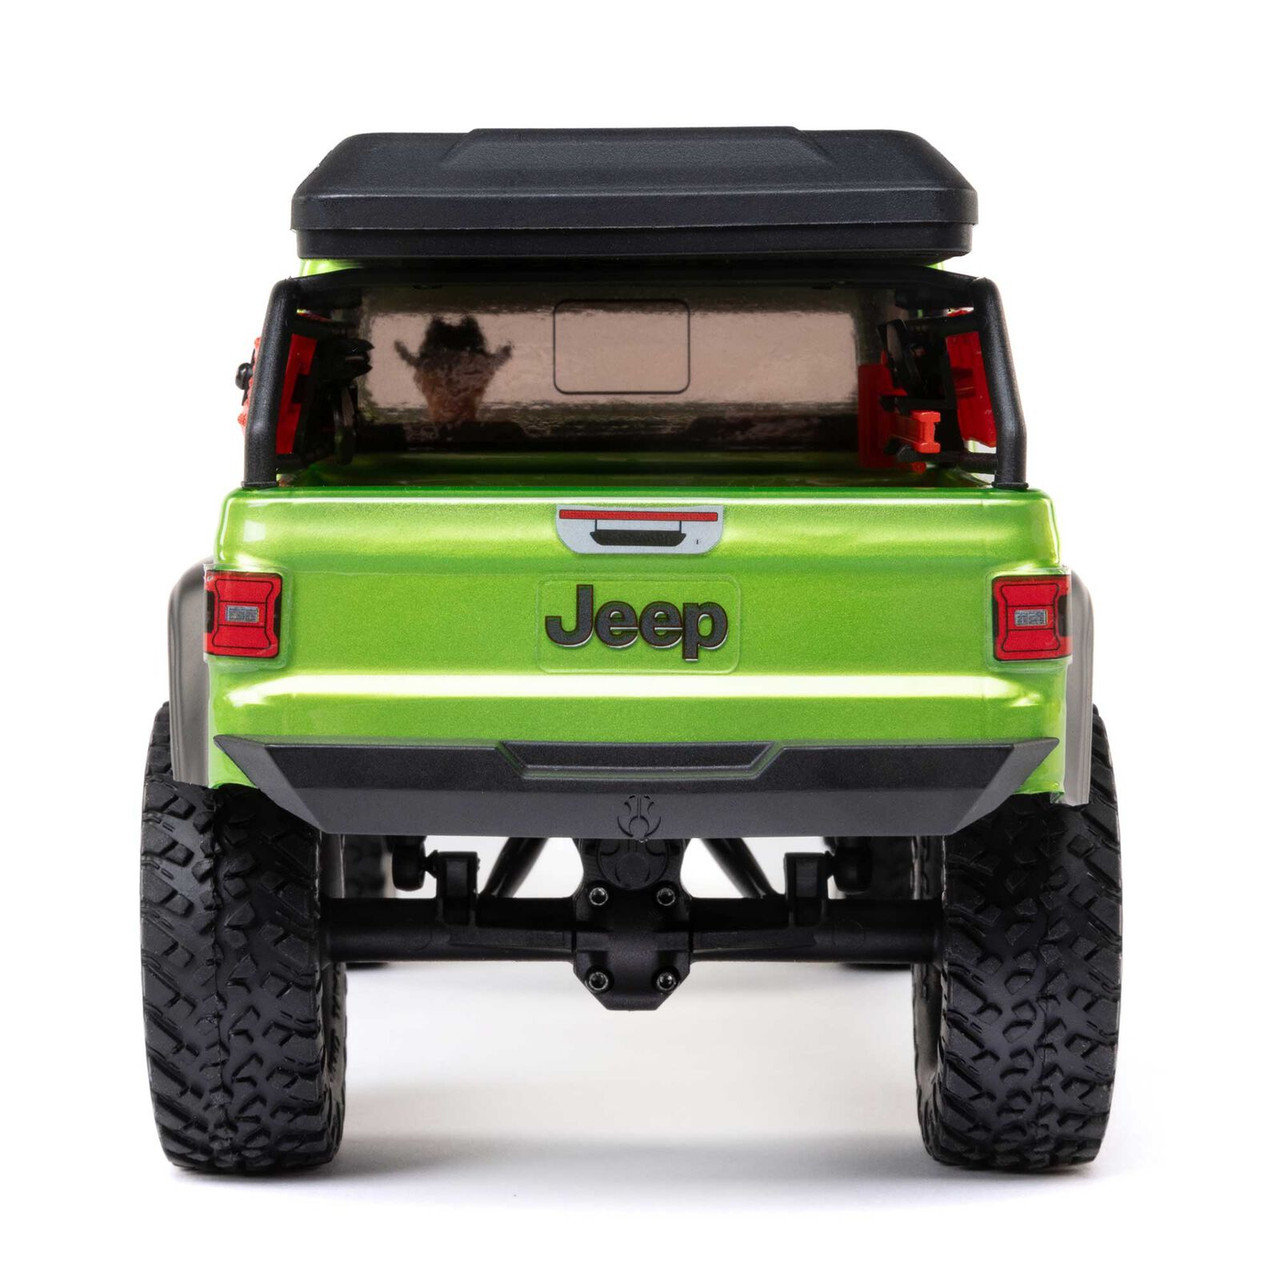 Axial SCX24 Jeep JT Gladiator 4WD Rock Crawler Brushed RTR, Green